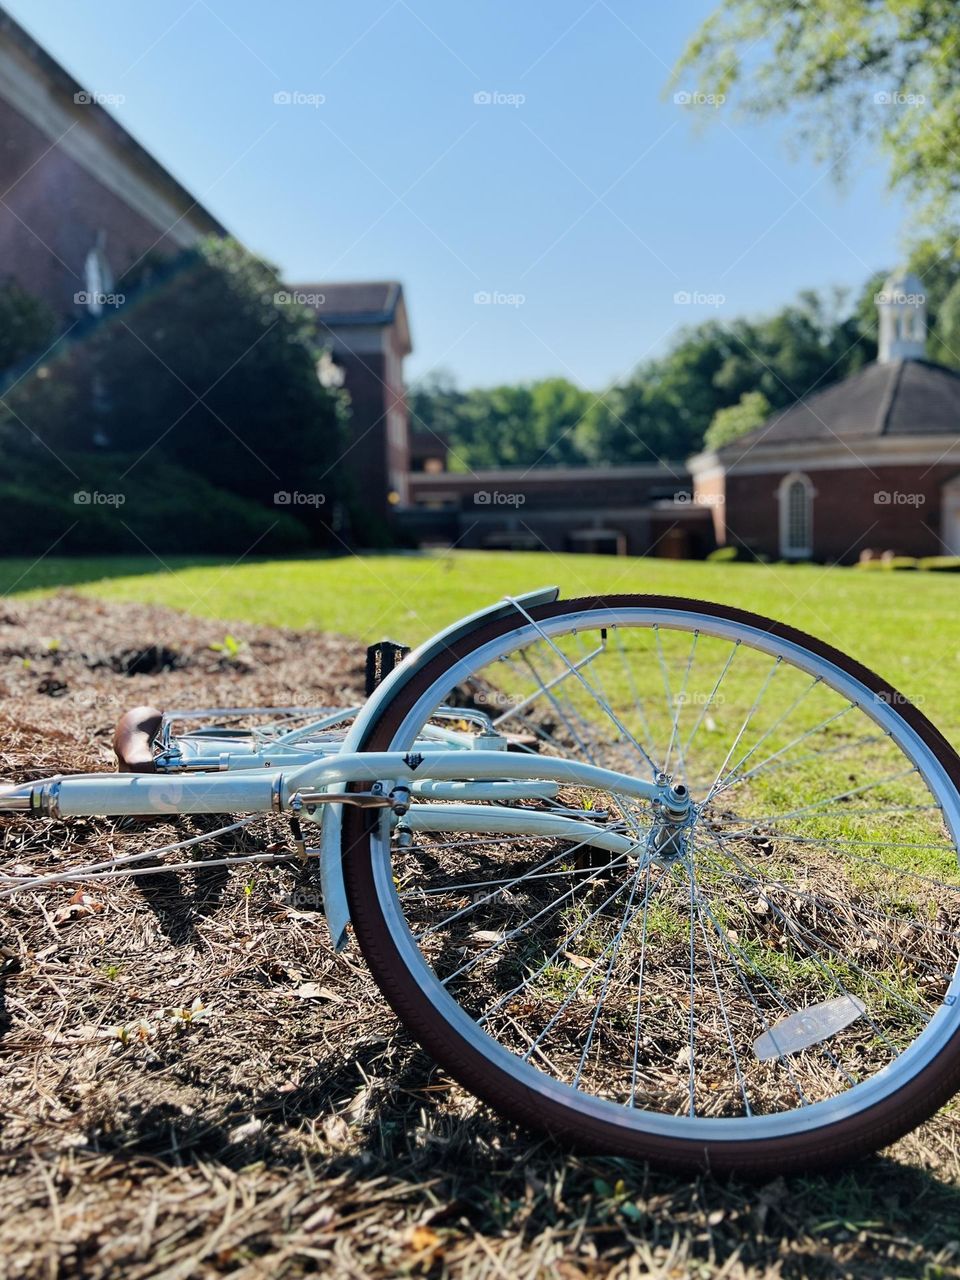 A blue cruiser style bicycle lying on its side in the foreground, with a grassy lawn, tree and brick church building in the background.